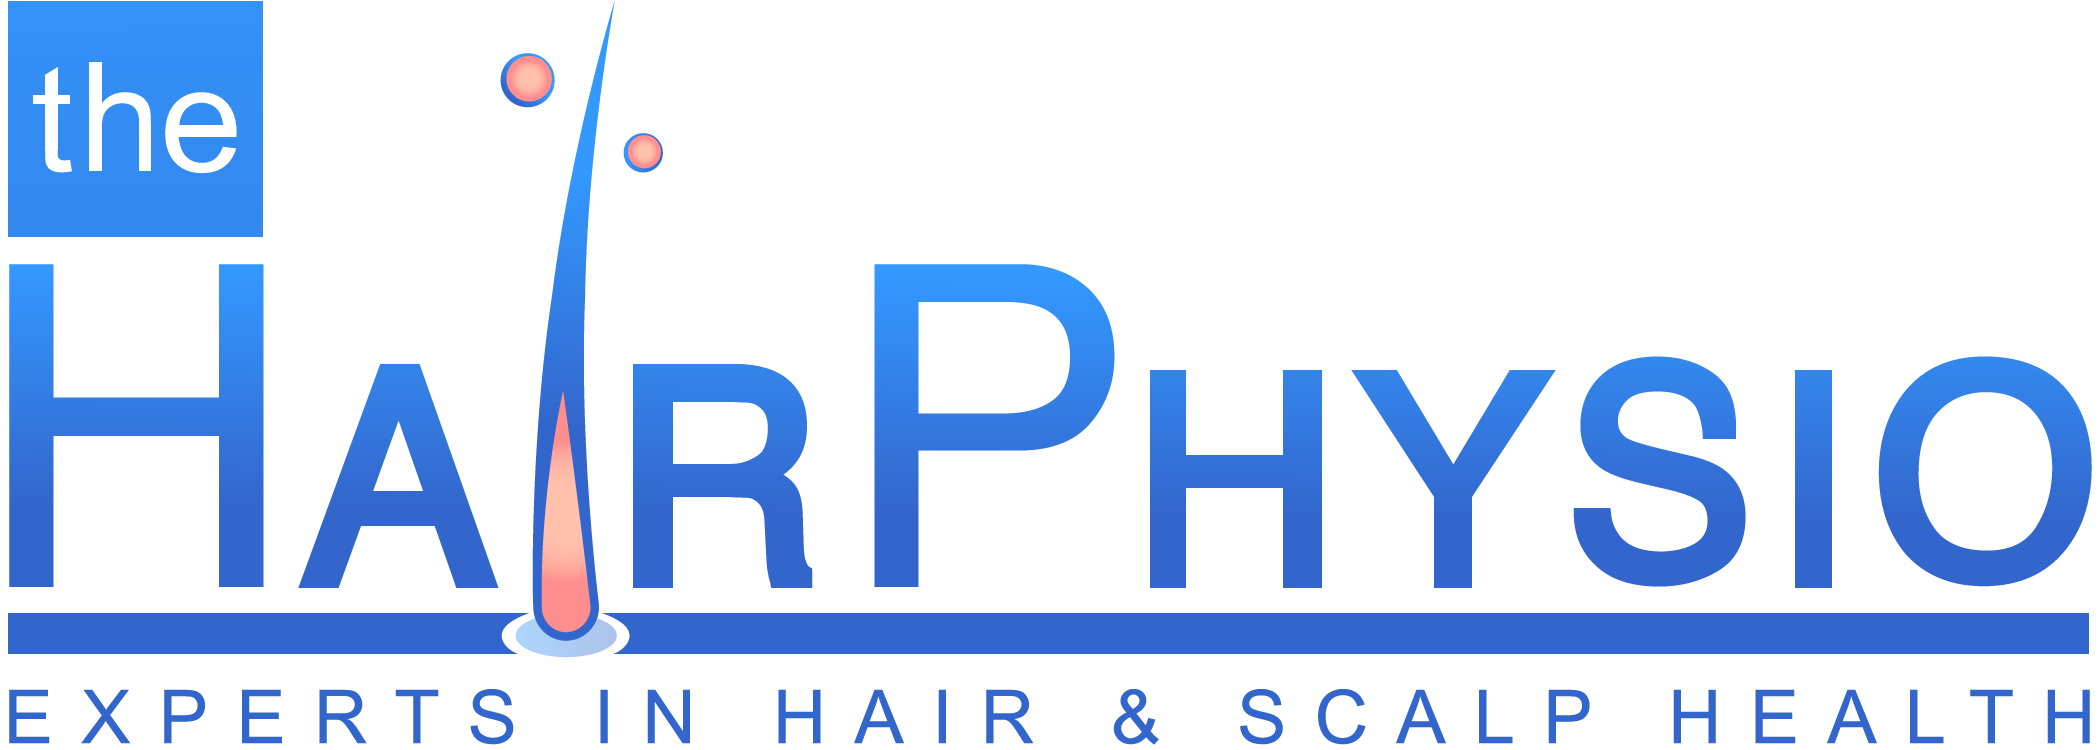 Hair Fact Cyclical Therapy For Men – The HairPhysio